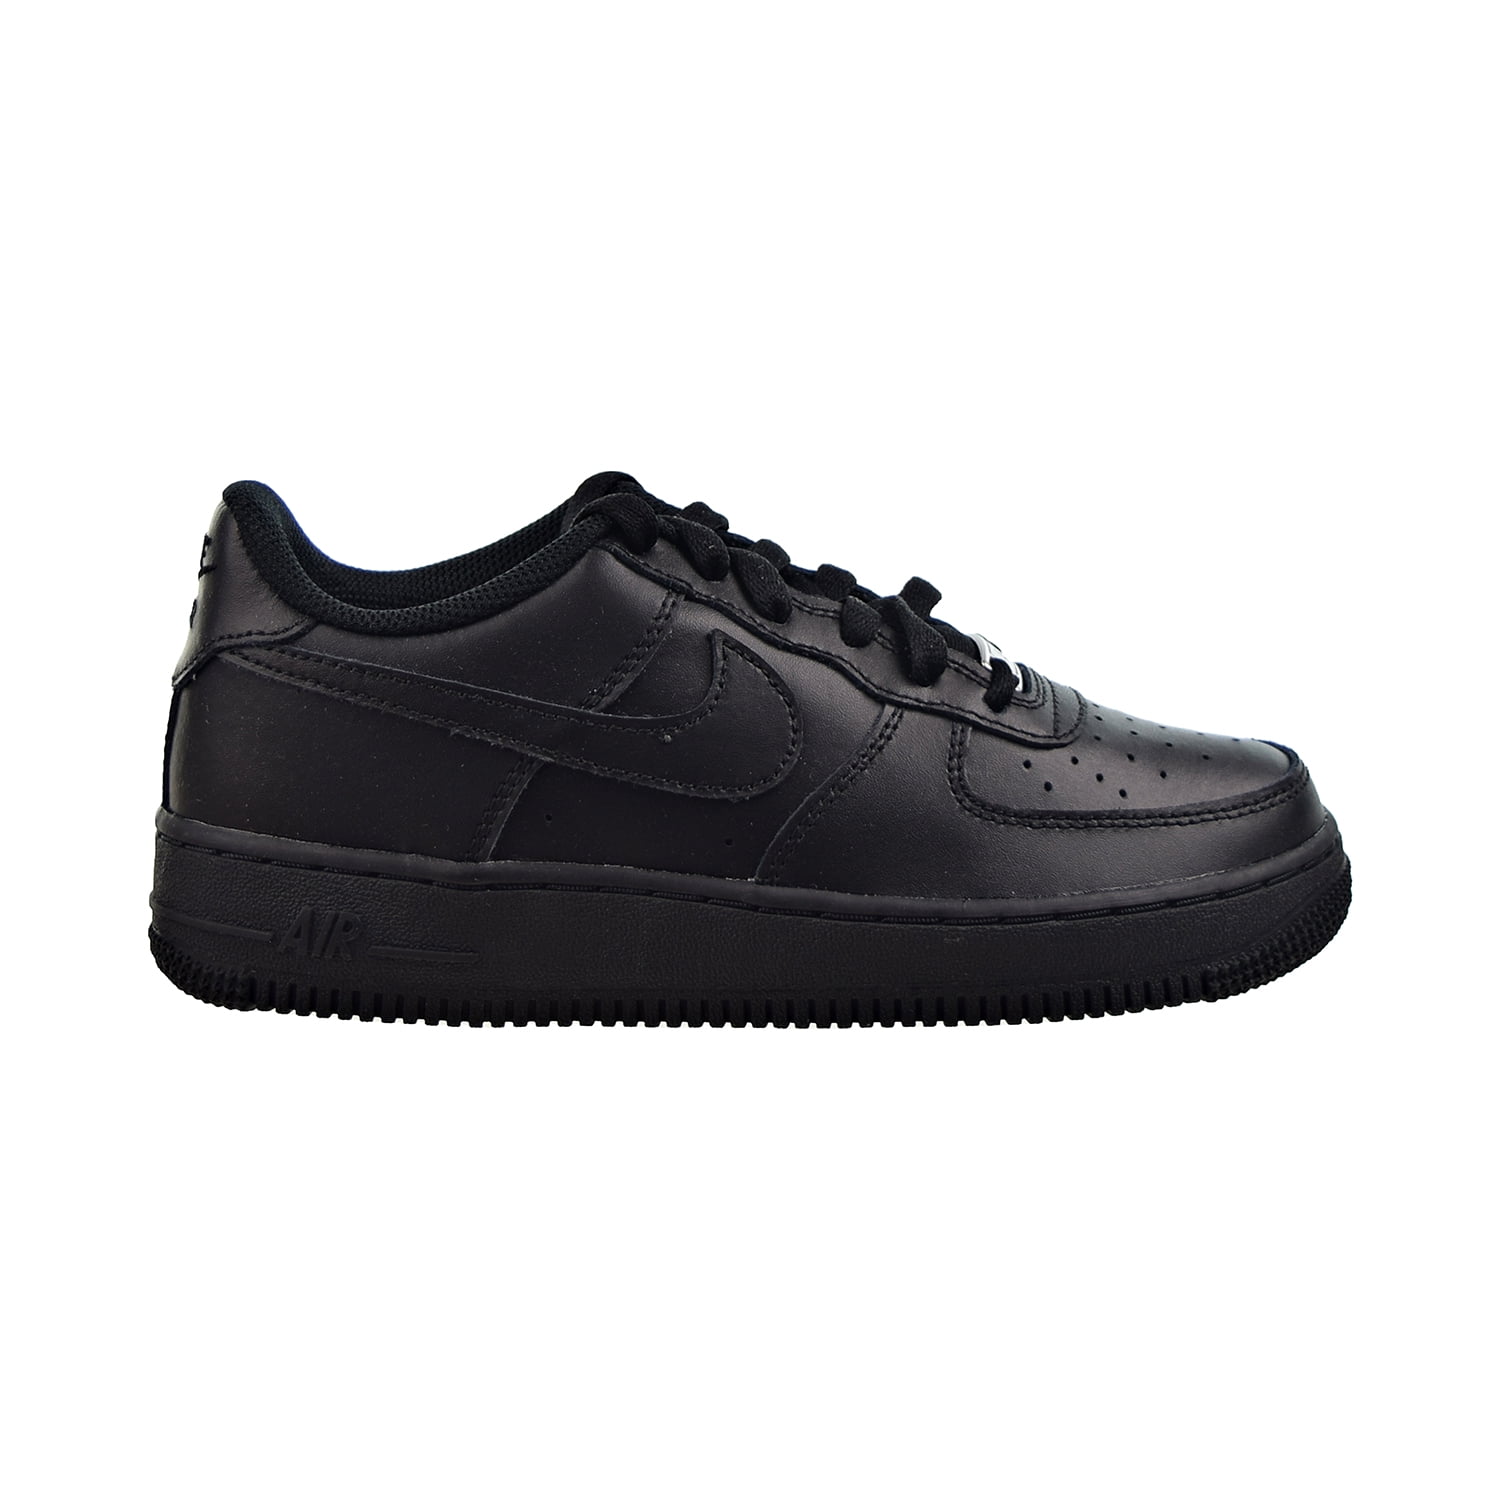 Brand New Air Force 1 Low “Undefeated” Size 11 $100.00